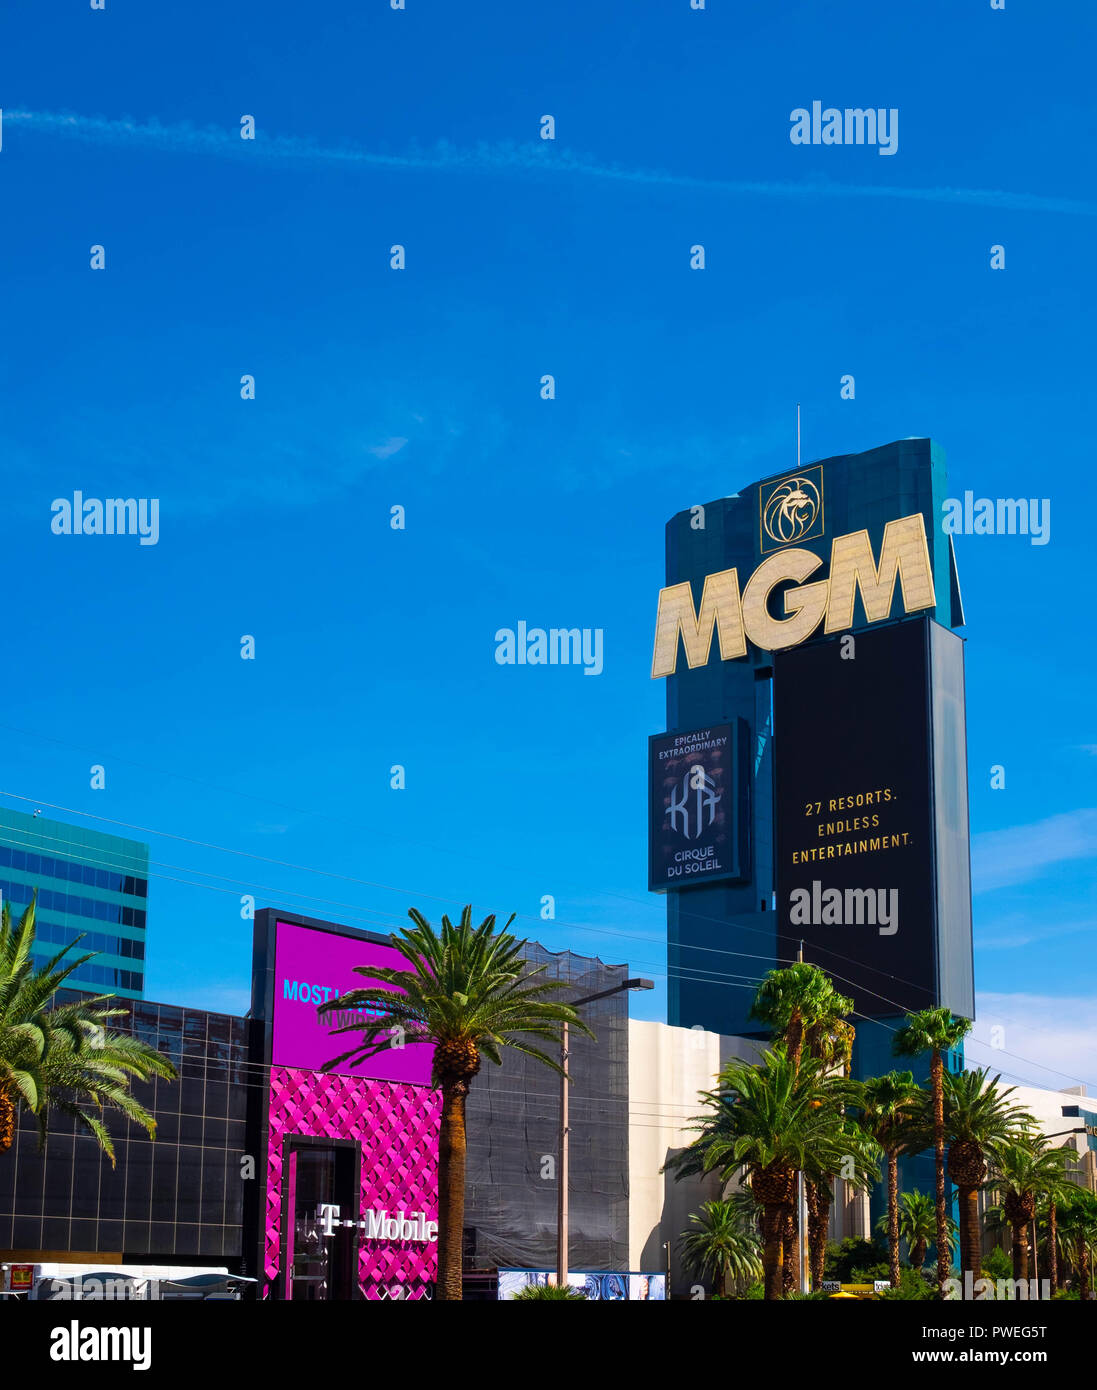 The MGM hotel and casino resort in the skyline of tourist destination Las Vegas Stock Photo